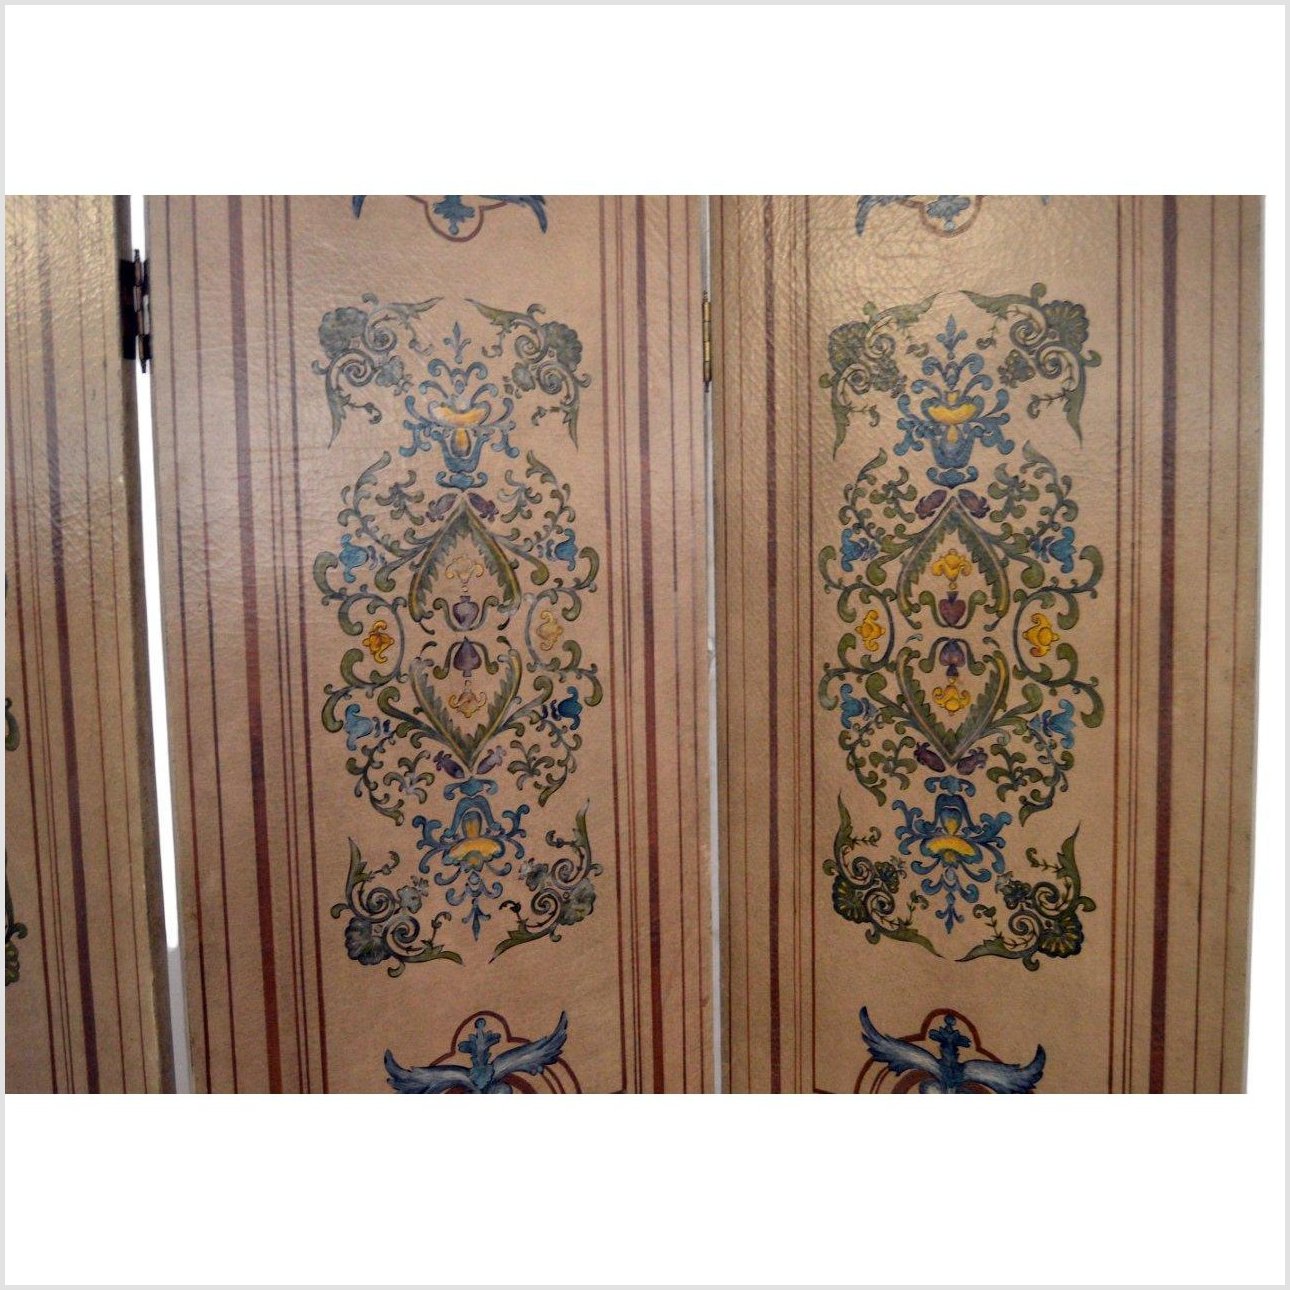 4-Panel Victorian Style Designed Screen-YN2836-4. Asian & Chinese Furniture, Art, Antiques, Vintage Home Décor for sale at FEA Home